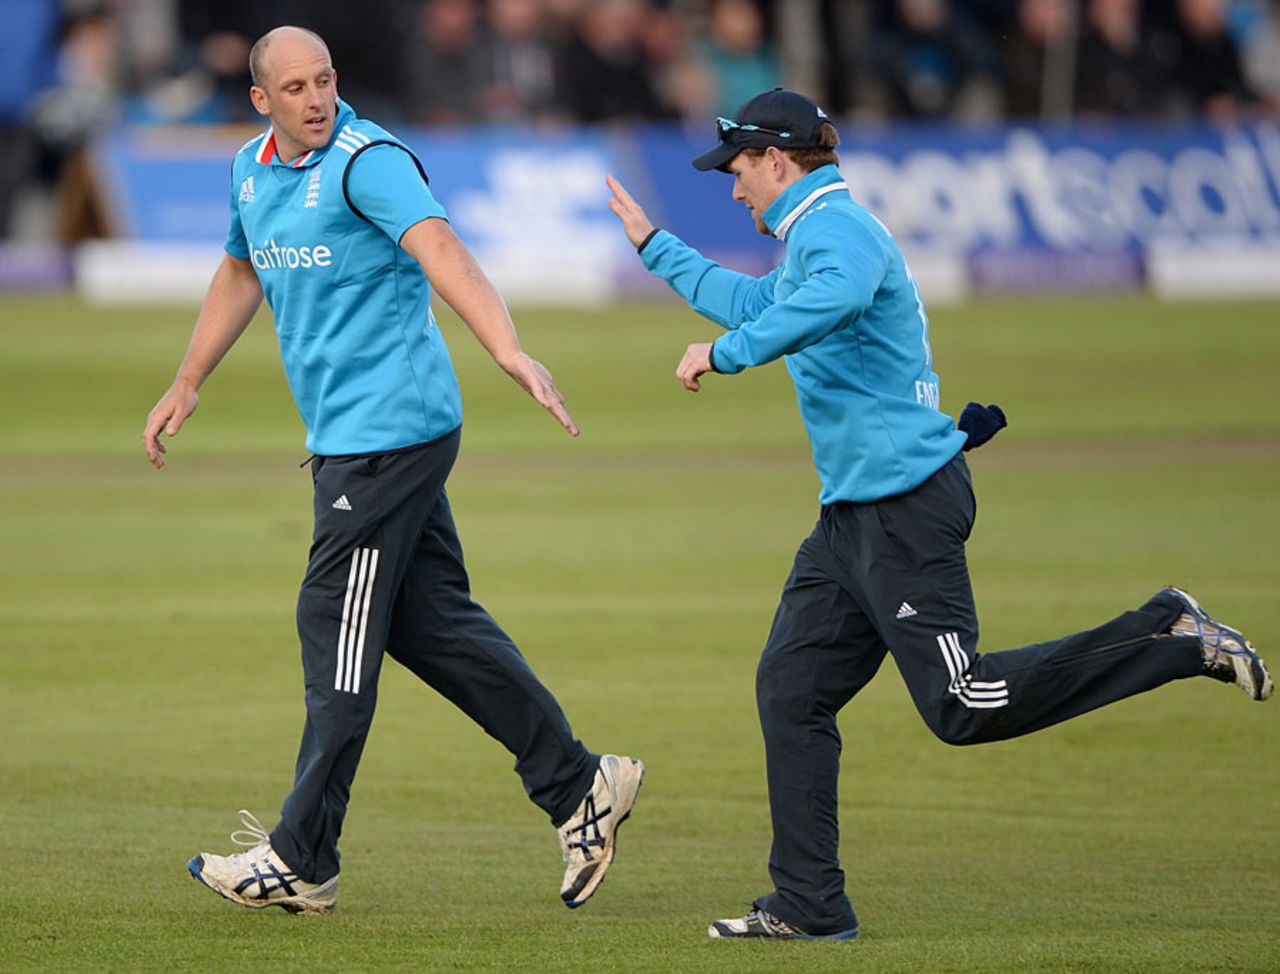 James Tredwell picked up four wickets, Scotland v England, only ODI, Aberdeen, May 9, 2014